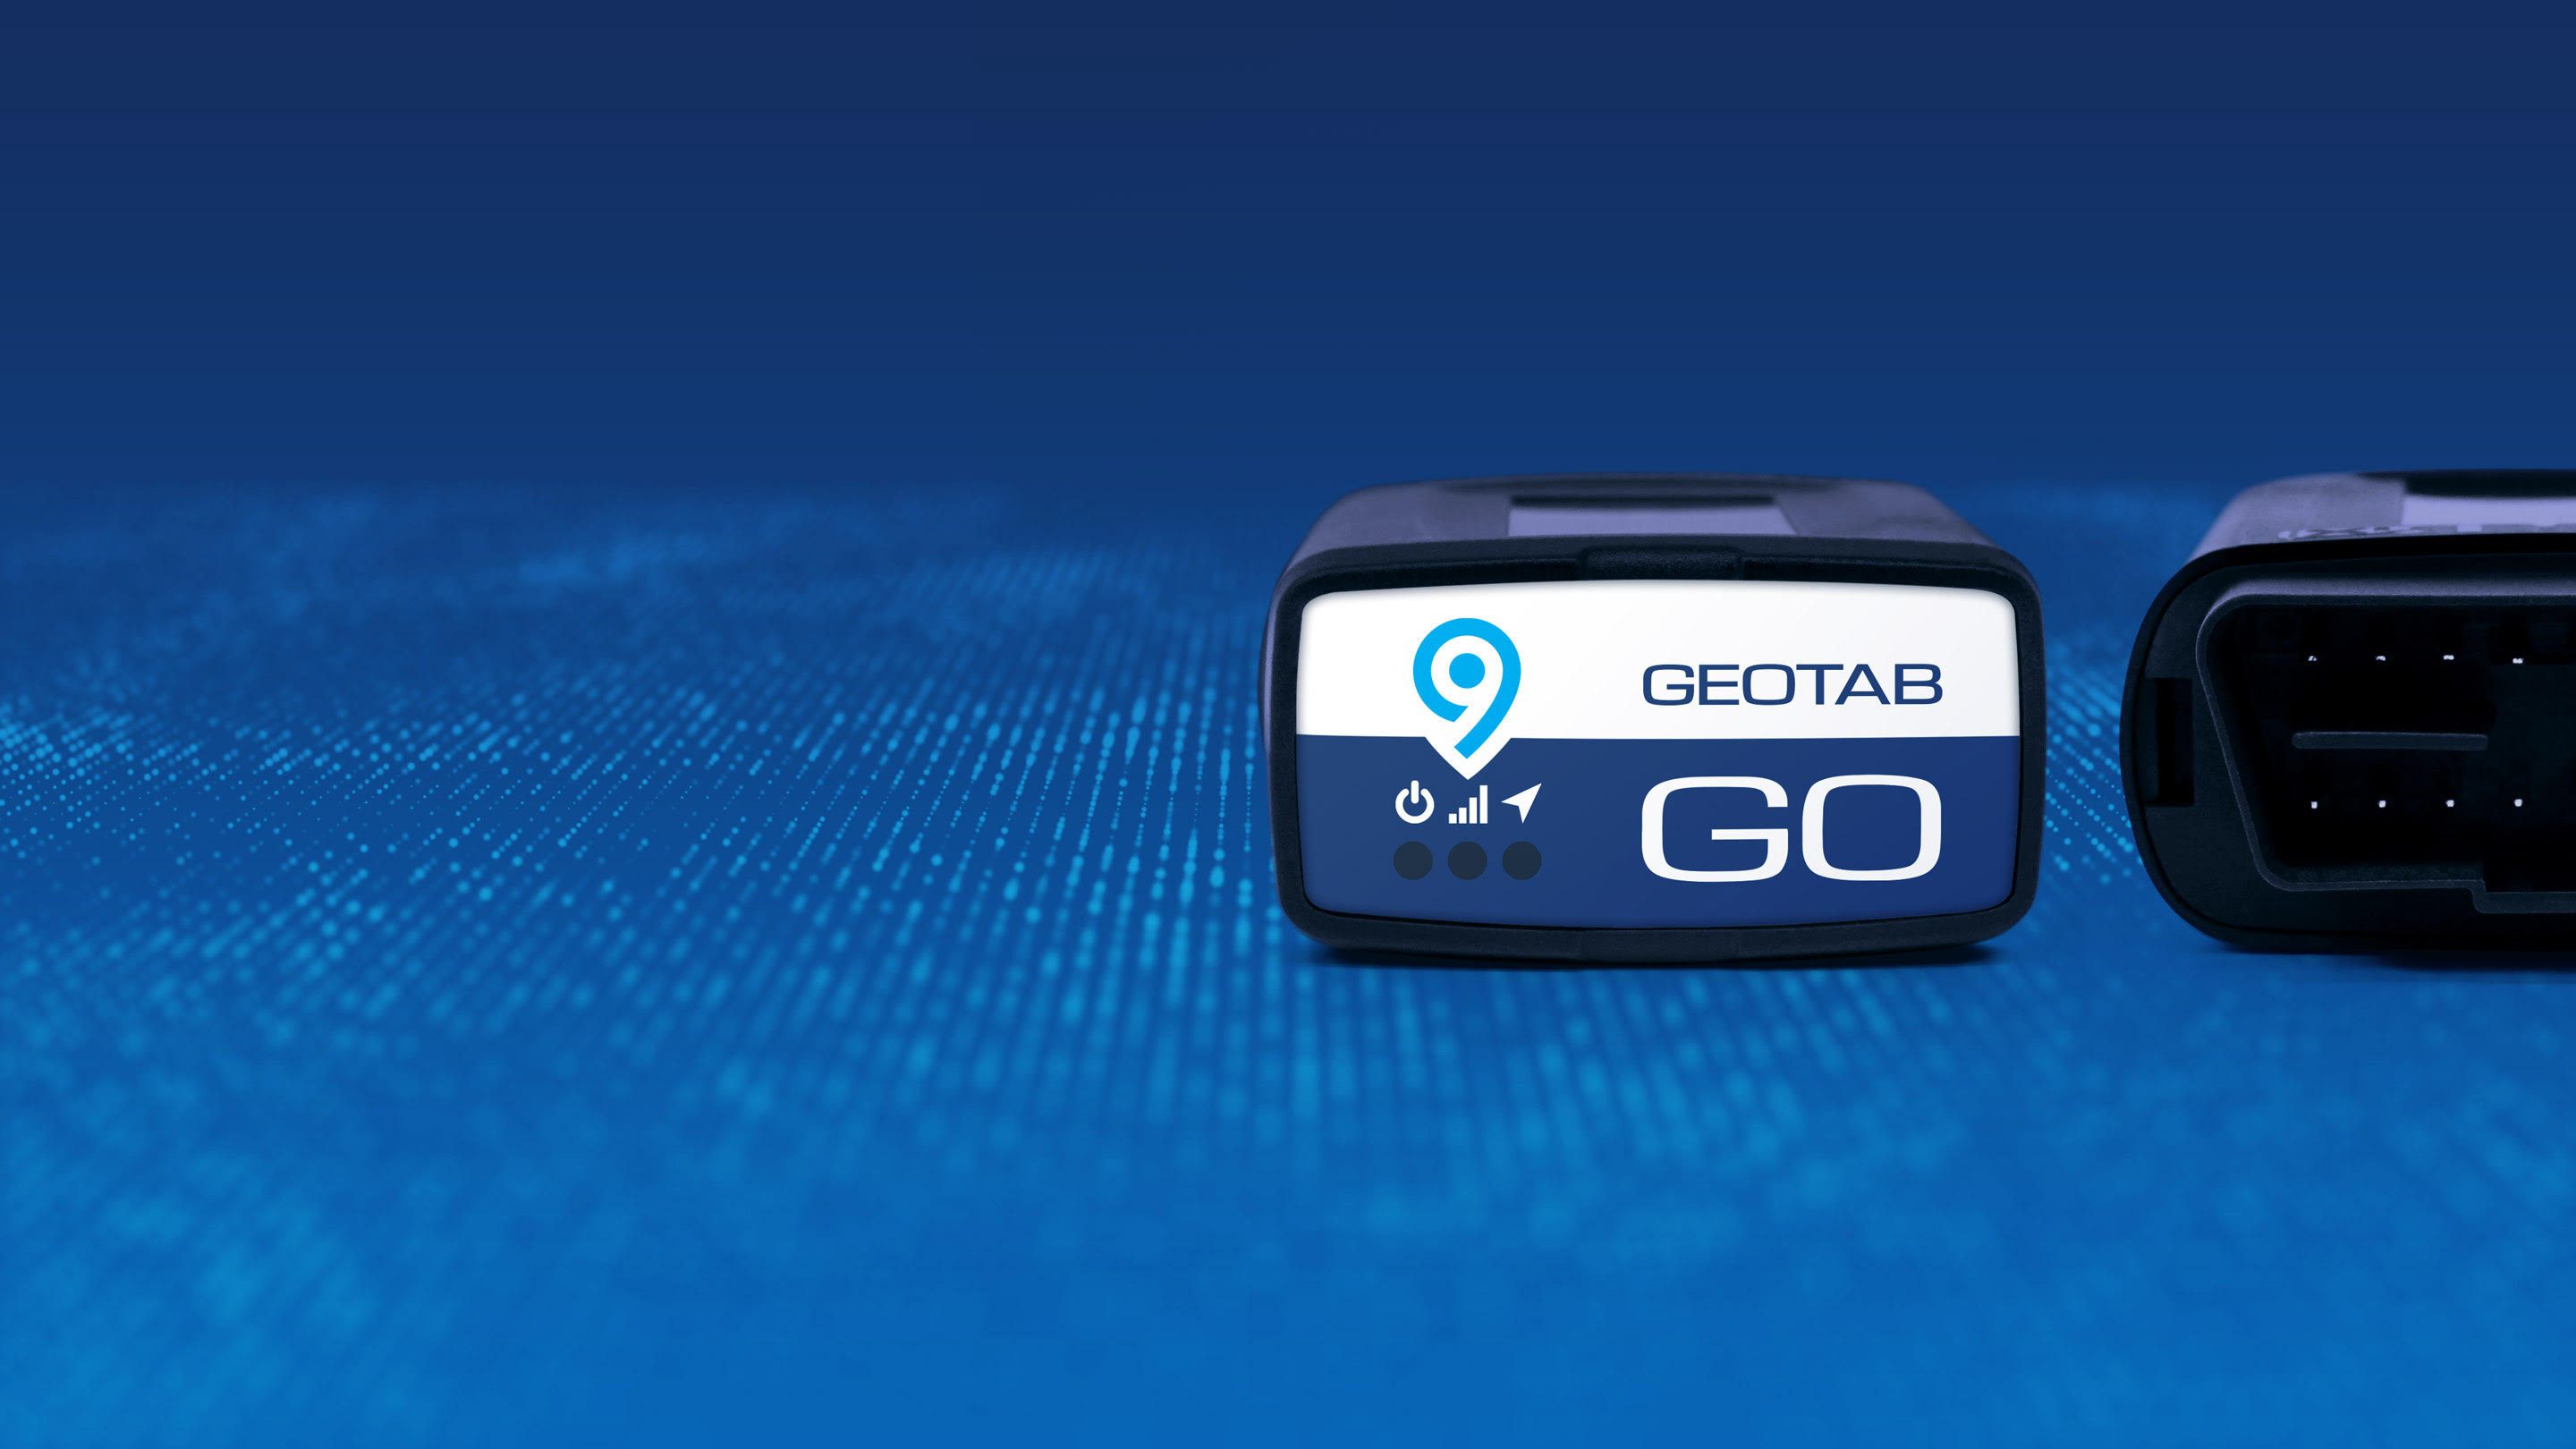 Image showing both sides of the GO device